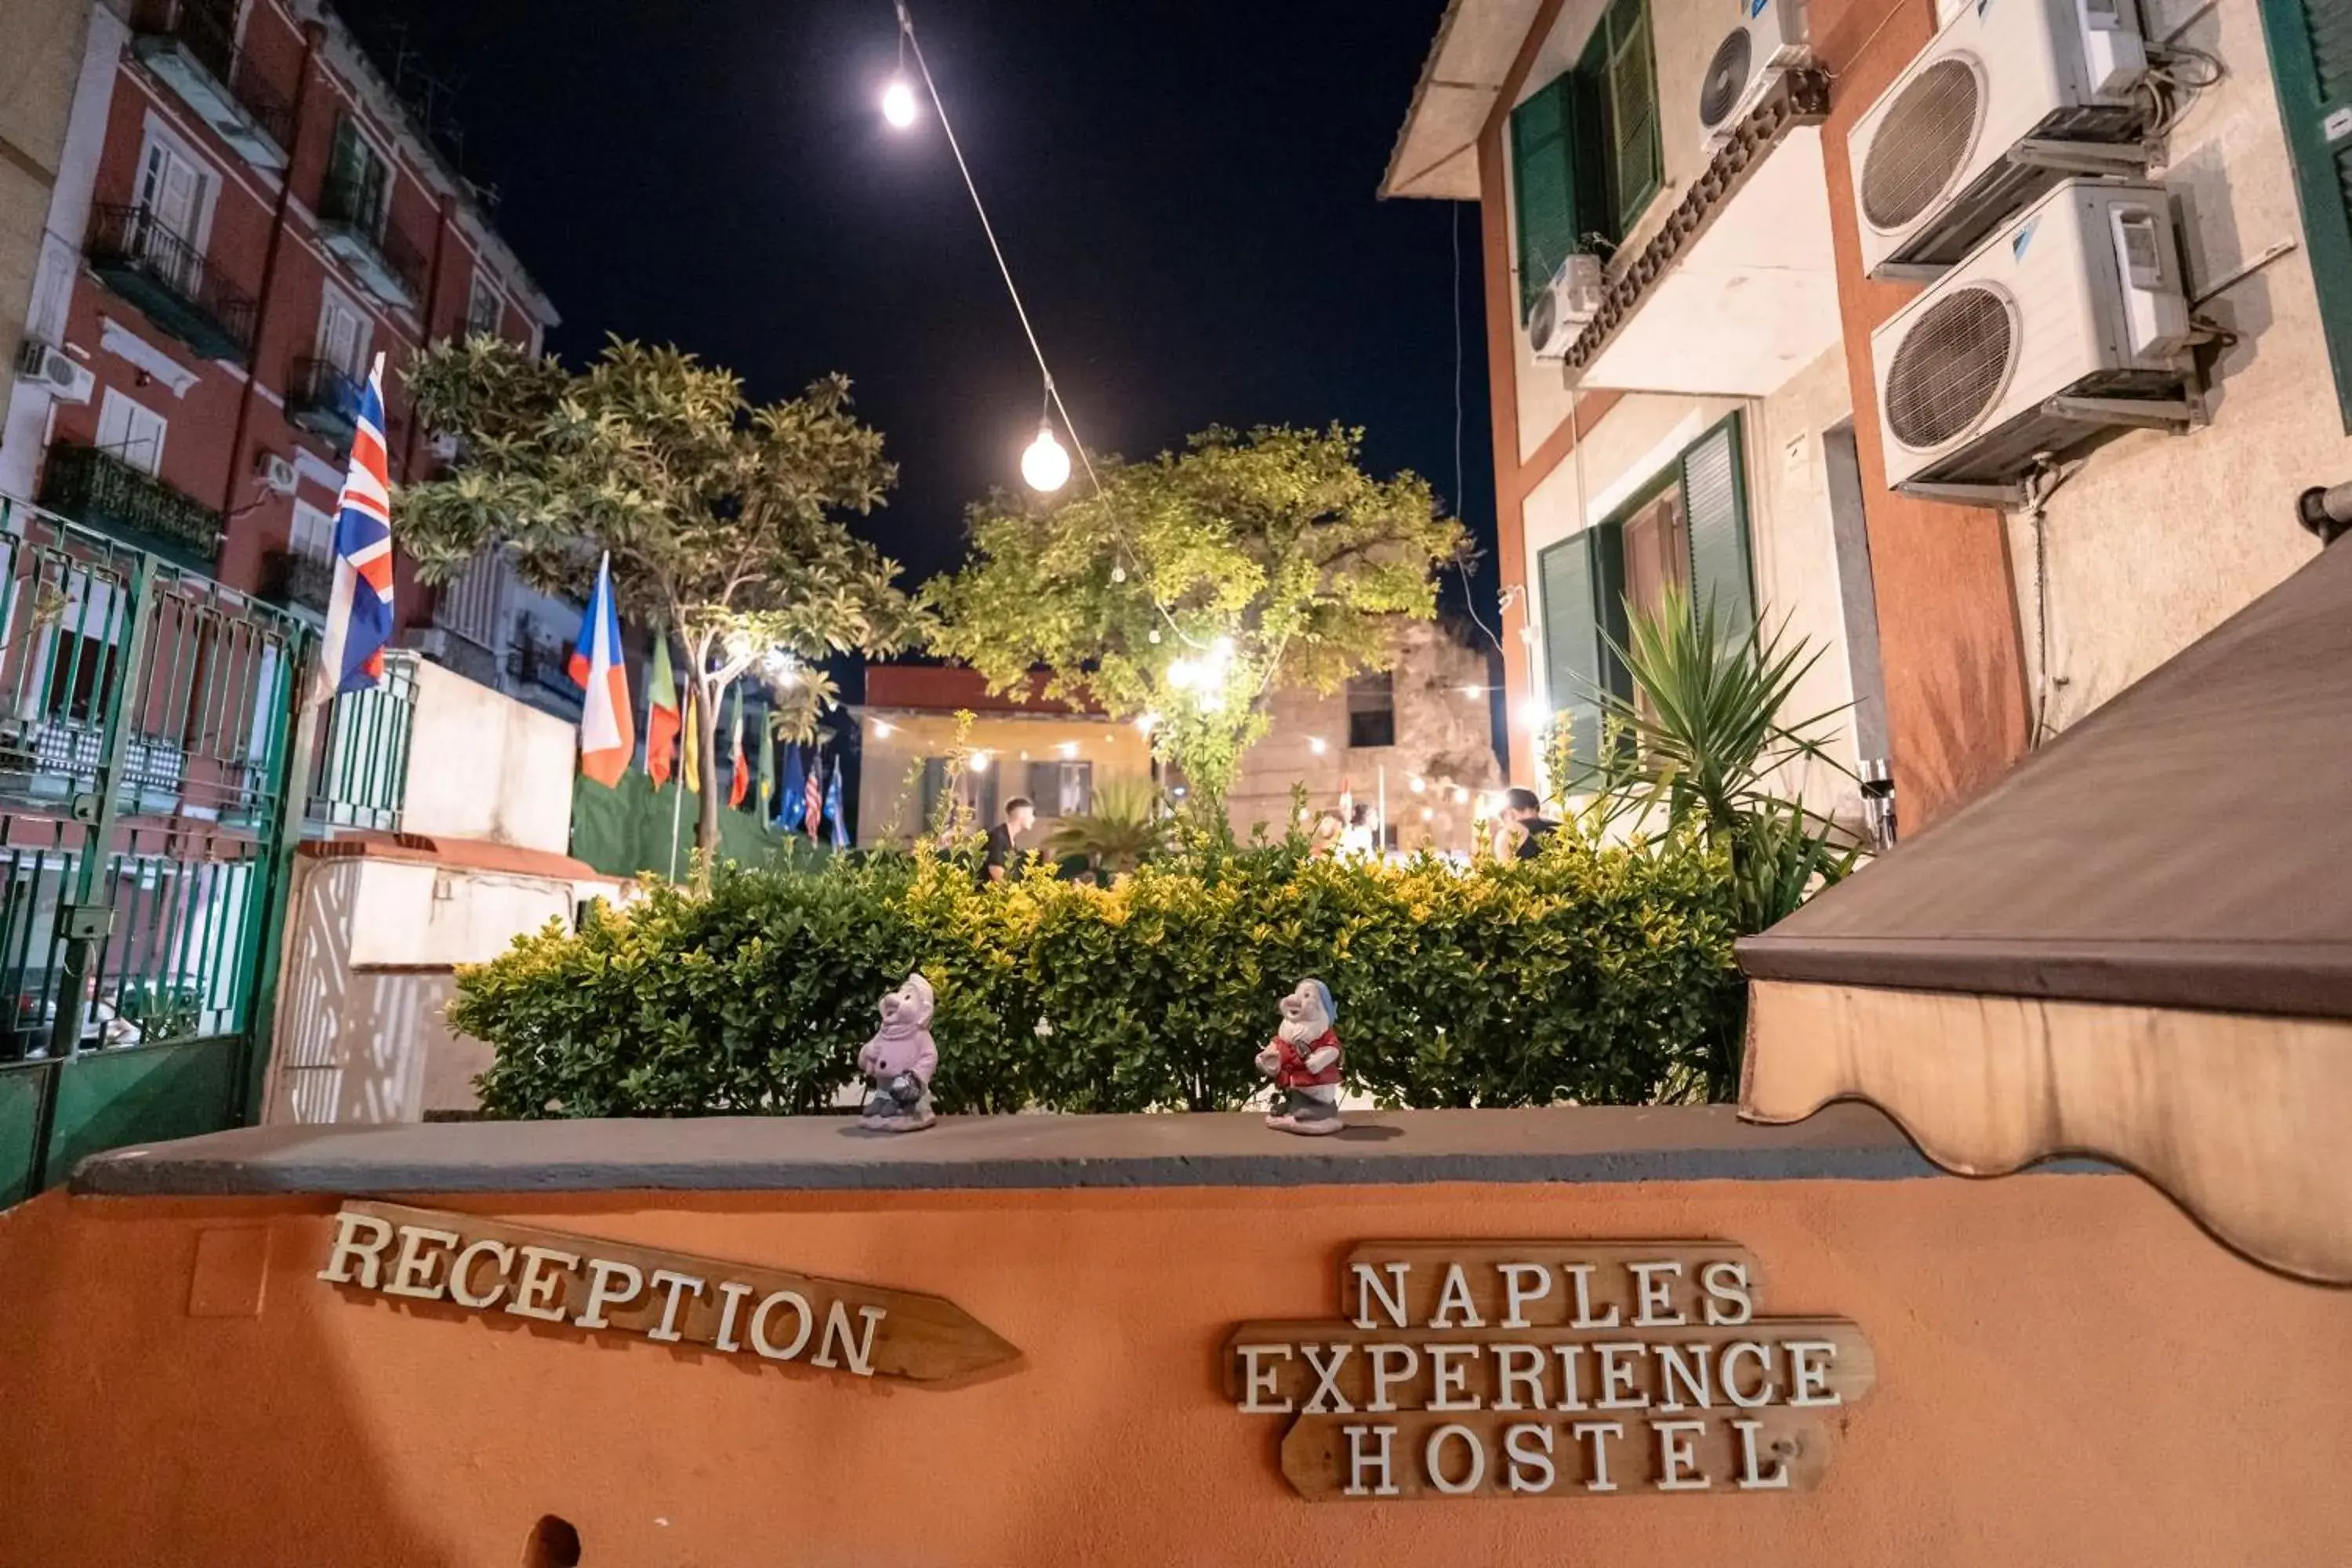 Property Building in Naples Experience Hostel